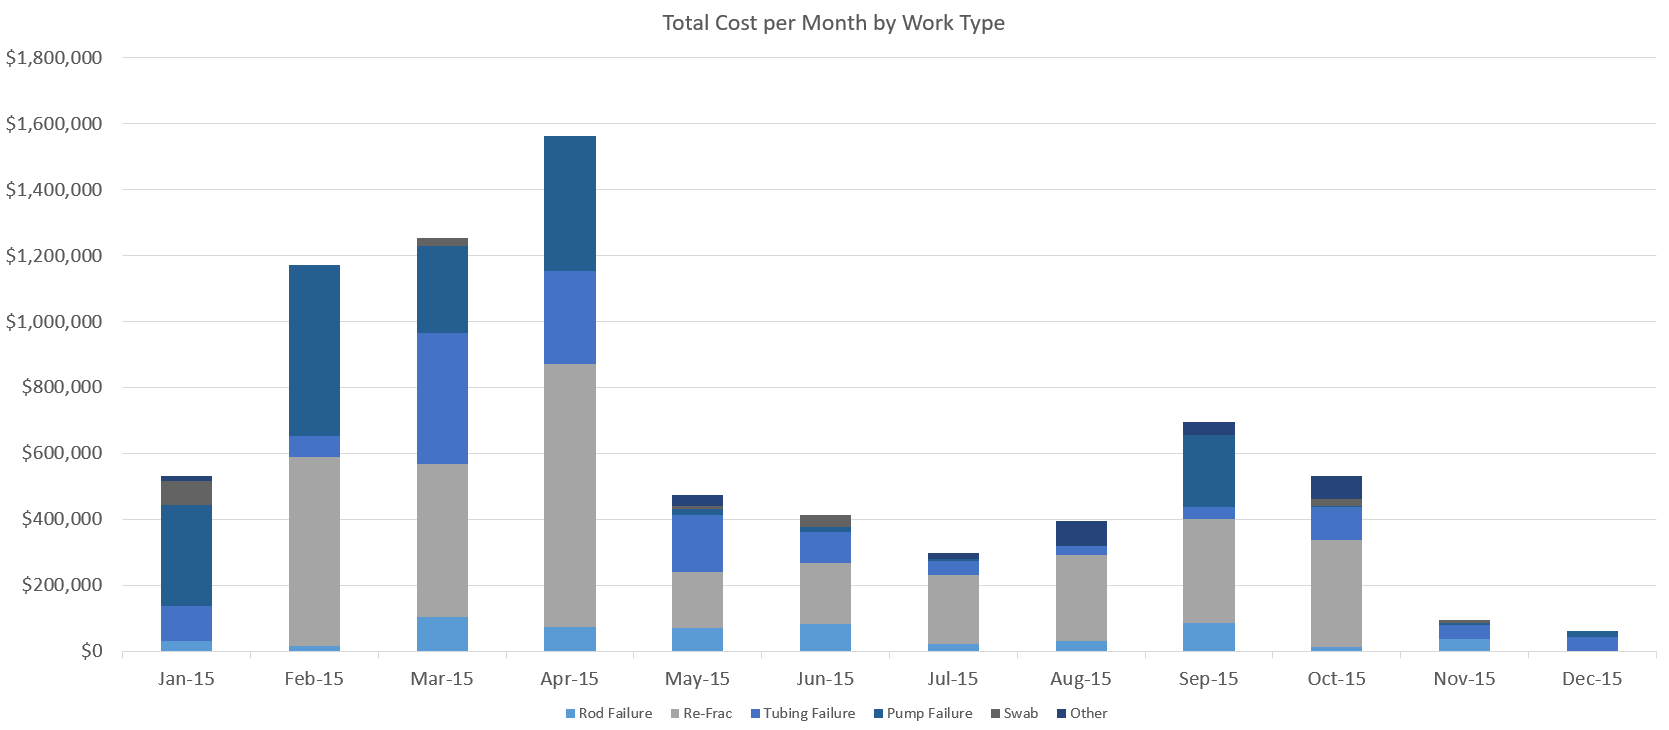 Total cost per month by work type